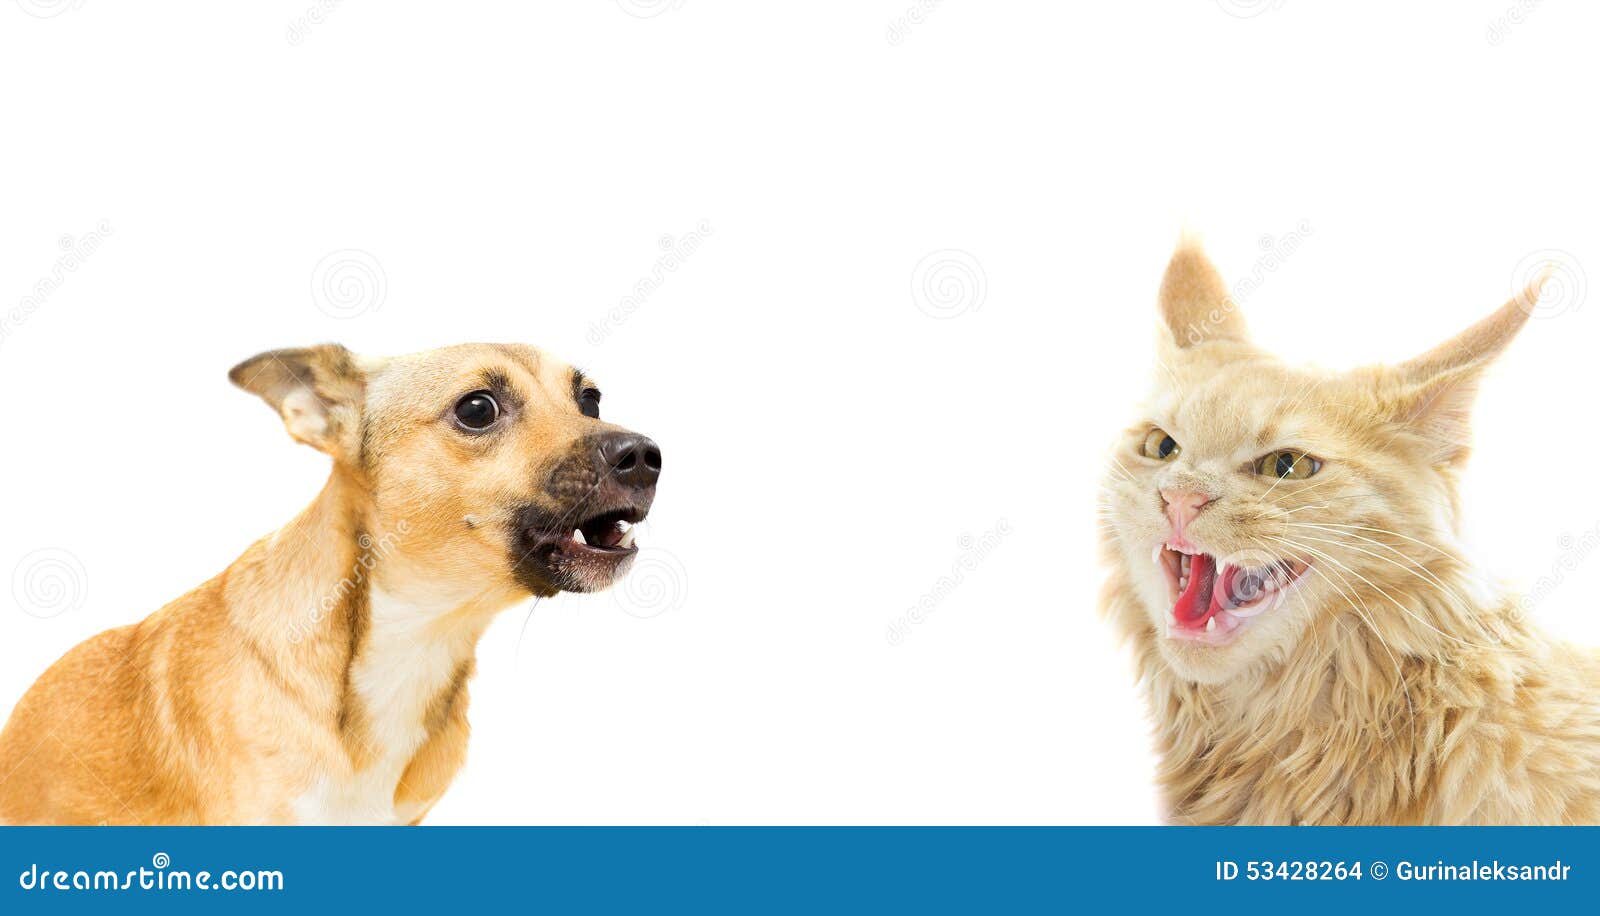  Angry  Cat  And Dog  Stock Photo Image 53428264